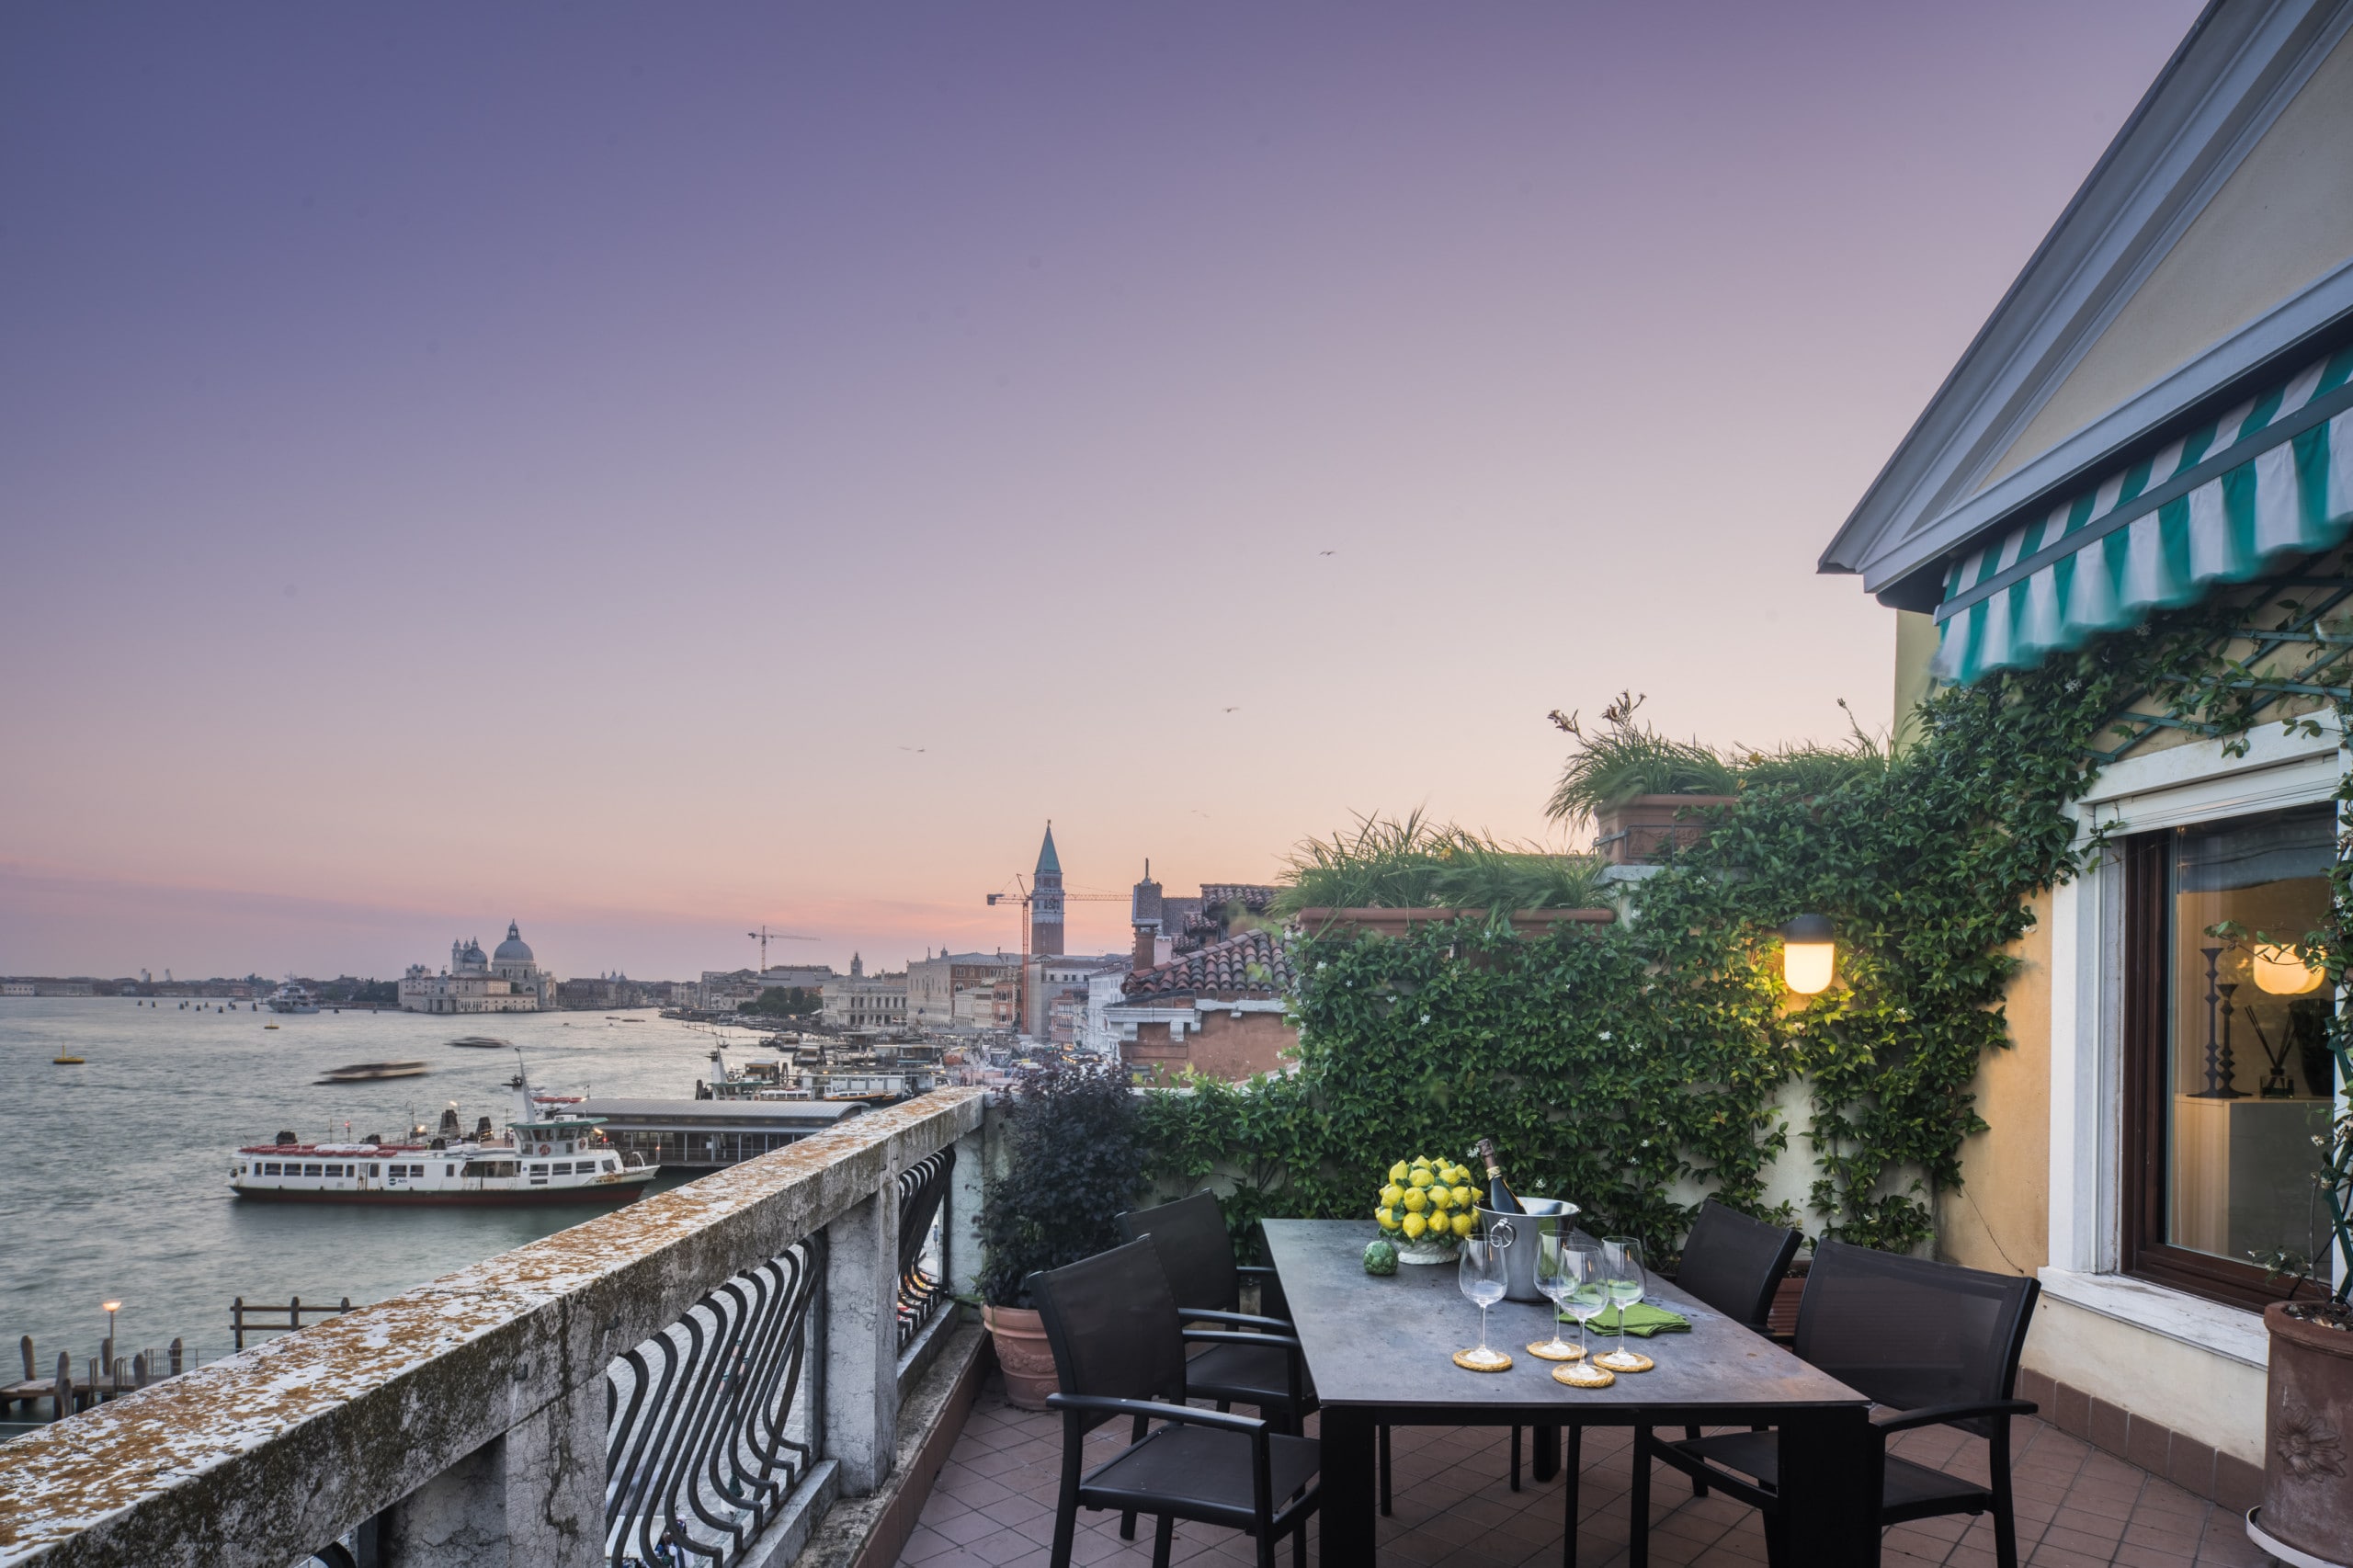 Property Image 1 - Heavenly 1-bedroom penthouse with spectacular view of St Mark’s Square